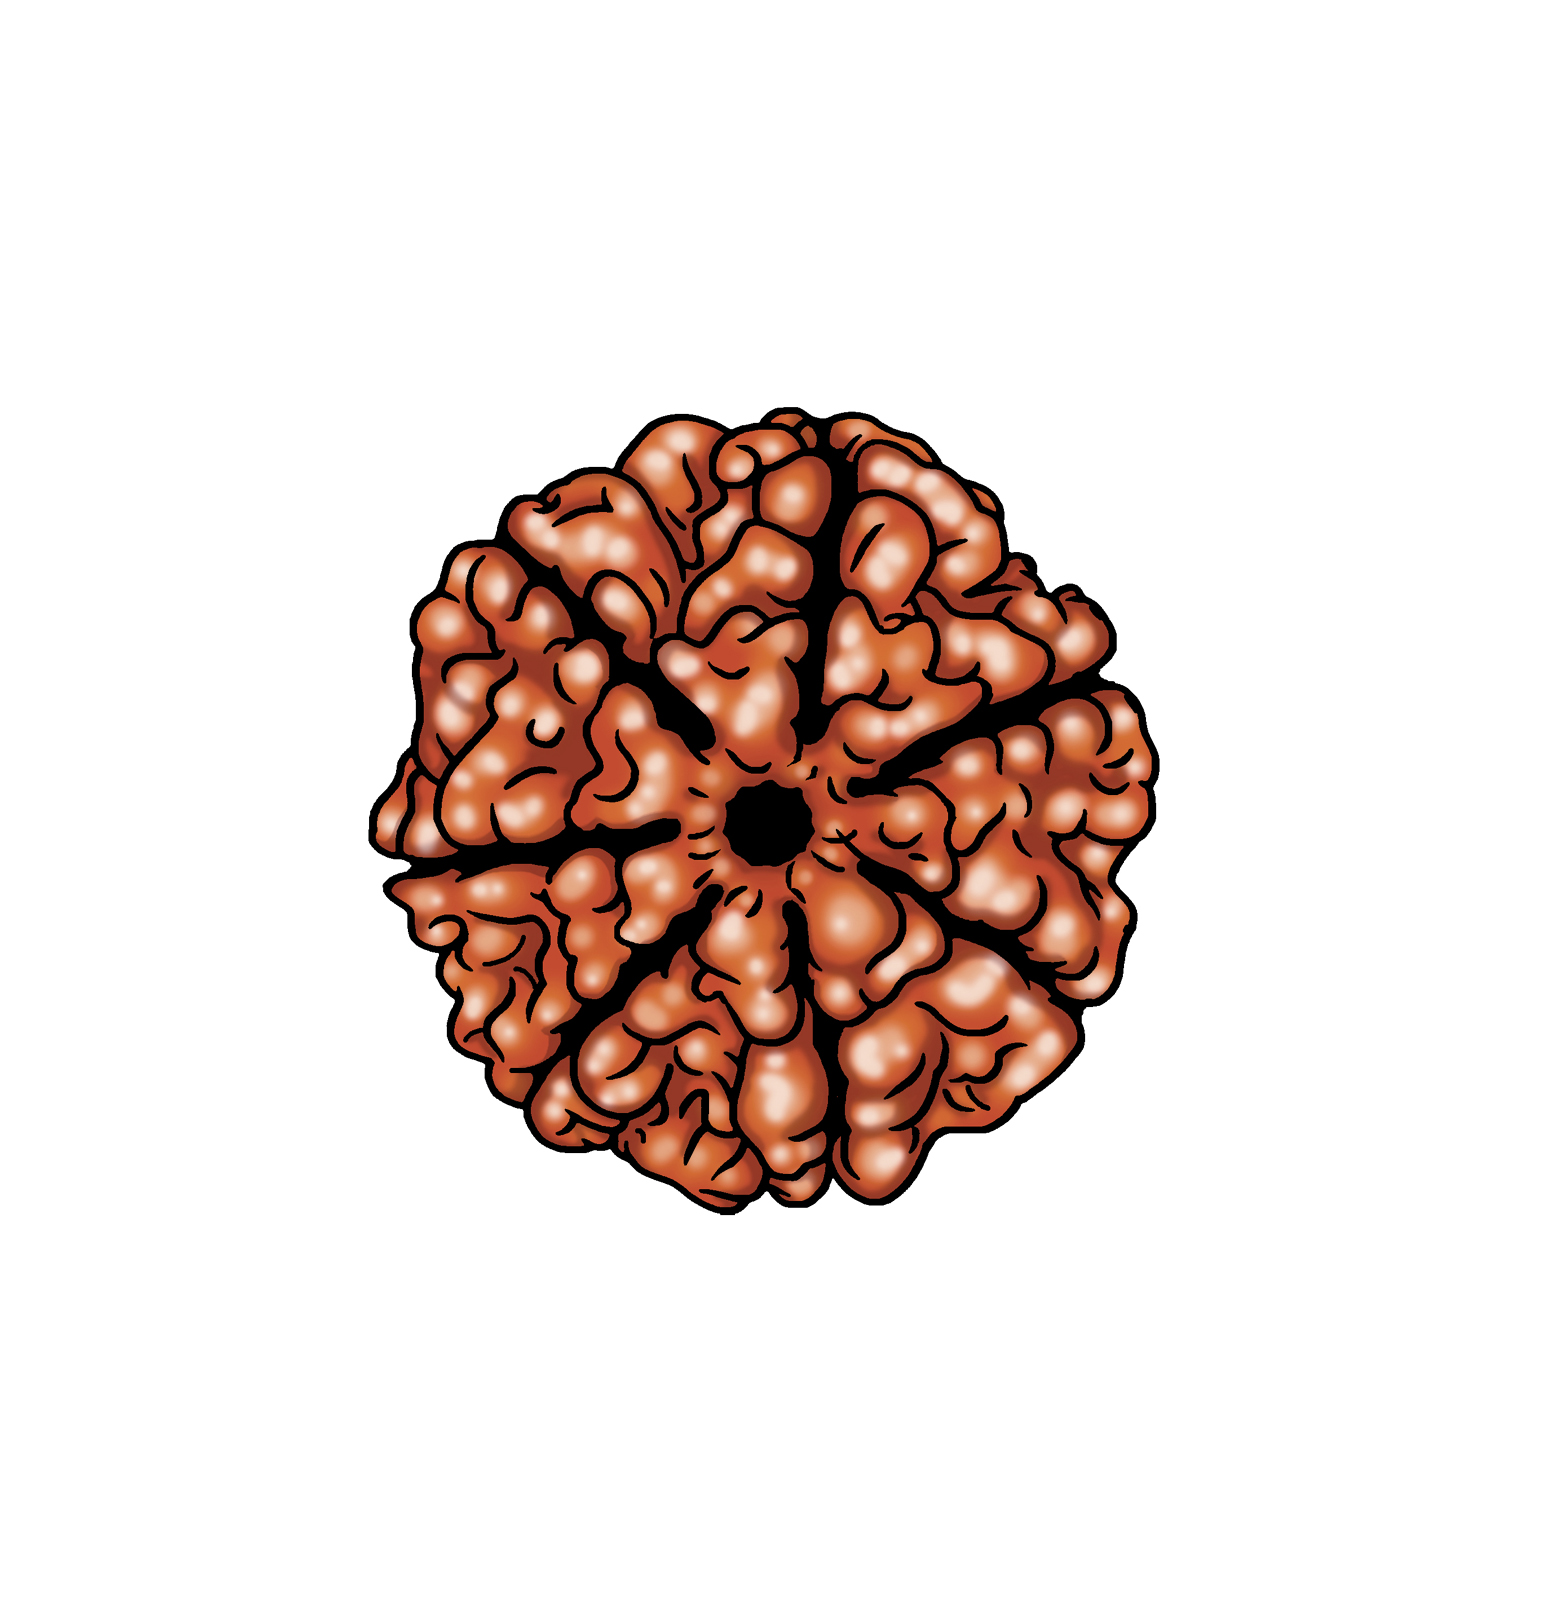 Rudraksha picture drawing clipart